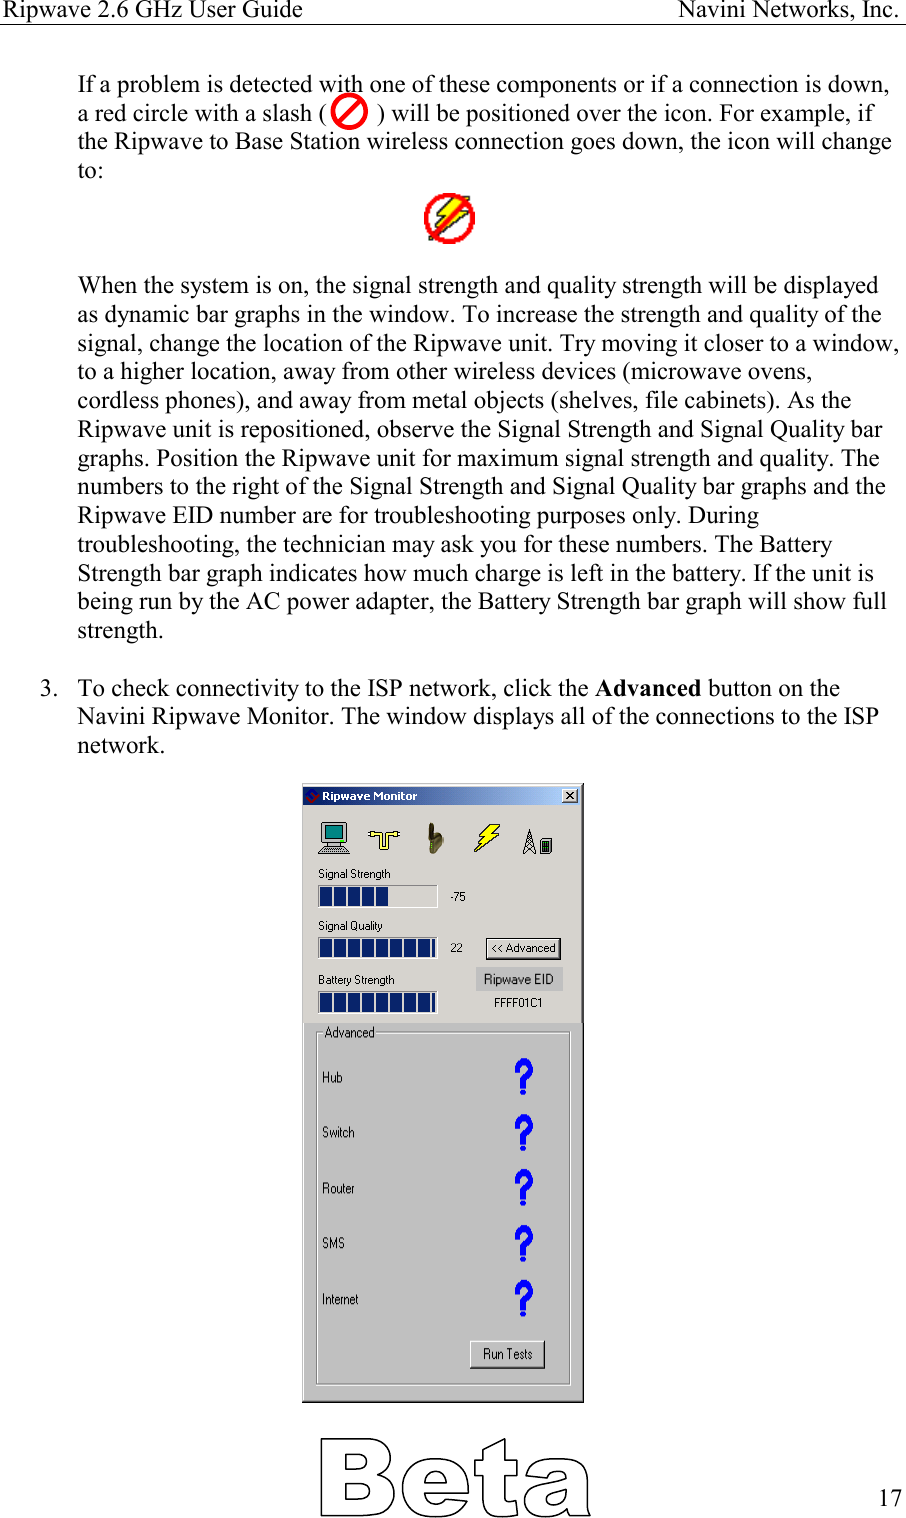 Ripwave 2.6 GHz User Guide                                                            Navini Networks, Inc. If a problem is detected with one of these components or if a connection is down, a red circle with a slash (        ) will be positioned over the icon. For example, if the Ripwave to Base Station wireless connection goes down, the icon will change to:     When the system is on, the signal strength and quality strength will be displayed as dynamic bar graphs in the window. To increase the strength and quality of the signal, change the location of the Ripwave unit. Try moving it closer to a window, to a higher location, away from other wireless devices (microwave ovens, cordless phones), and away from metal objects (shelves, file cabinets). As the Ripwave unit is repositioned, observe the Signal Strength and Signal Quality bar graphs. Position the Ripwave unit for maximum signal strength and quality. The numbers to the right of the Signal Strength and Signal Quality bar graphs and the Ripwave EID number are for troubleshooting purposes only. During troubleshooting, the technician may ask you for these numbers. The Battery Strength bar graph indicates how much charge is left in the battery. If the unit is being run by the AC power adapter, the Battery Strength bar graph will show full strength.  3.  To check connectivity to the ISP network, click the Advanced button on the Navini Ripwave Monitor. The window displays all of the connections to the ISP network.      17